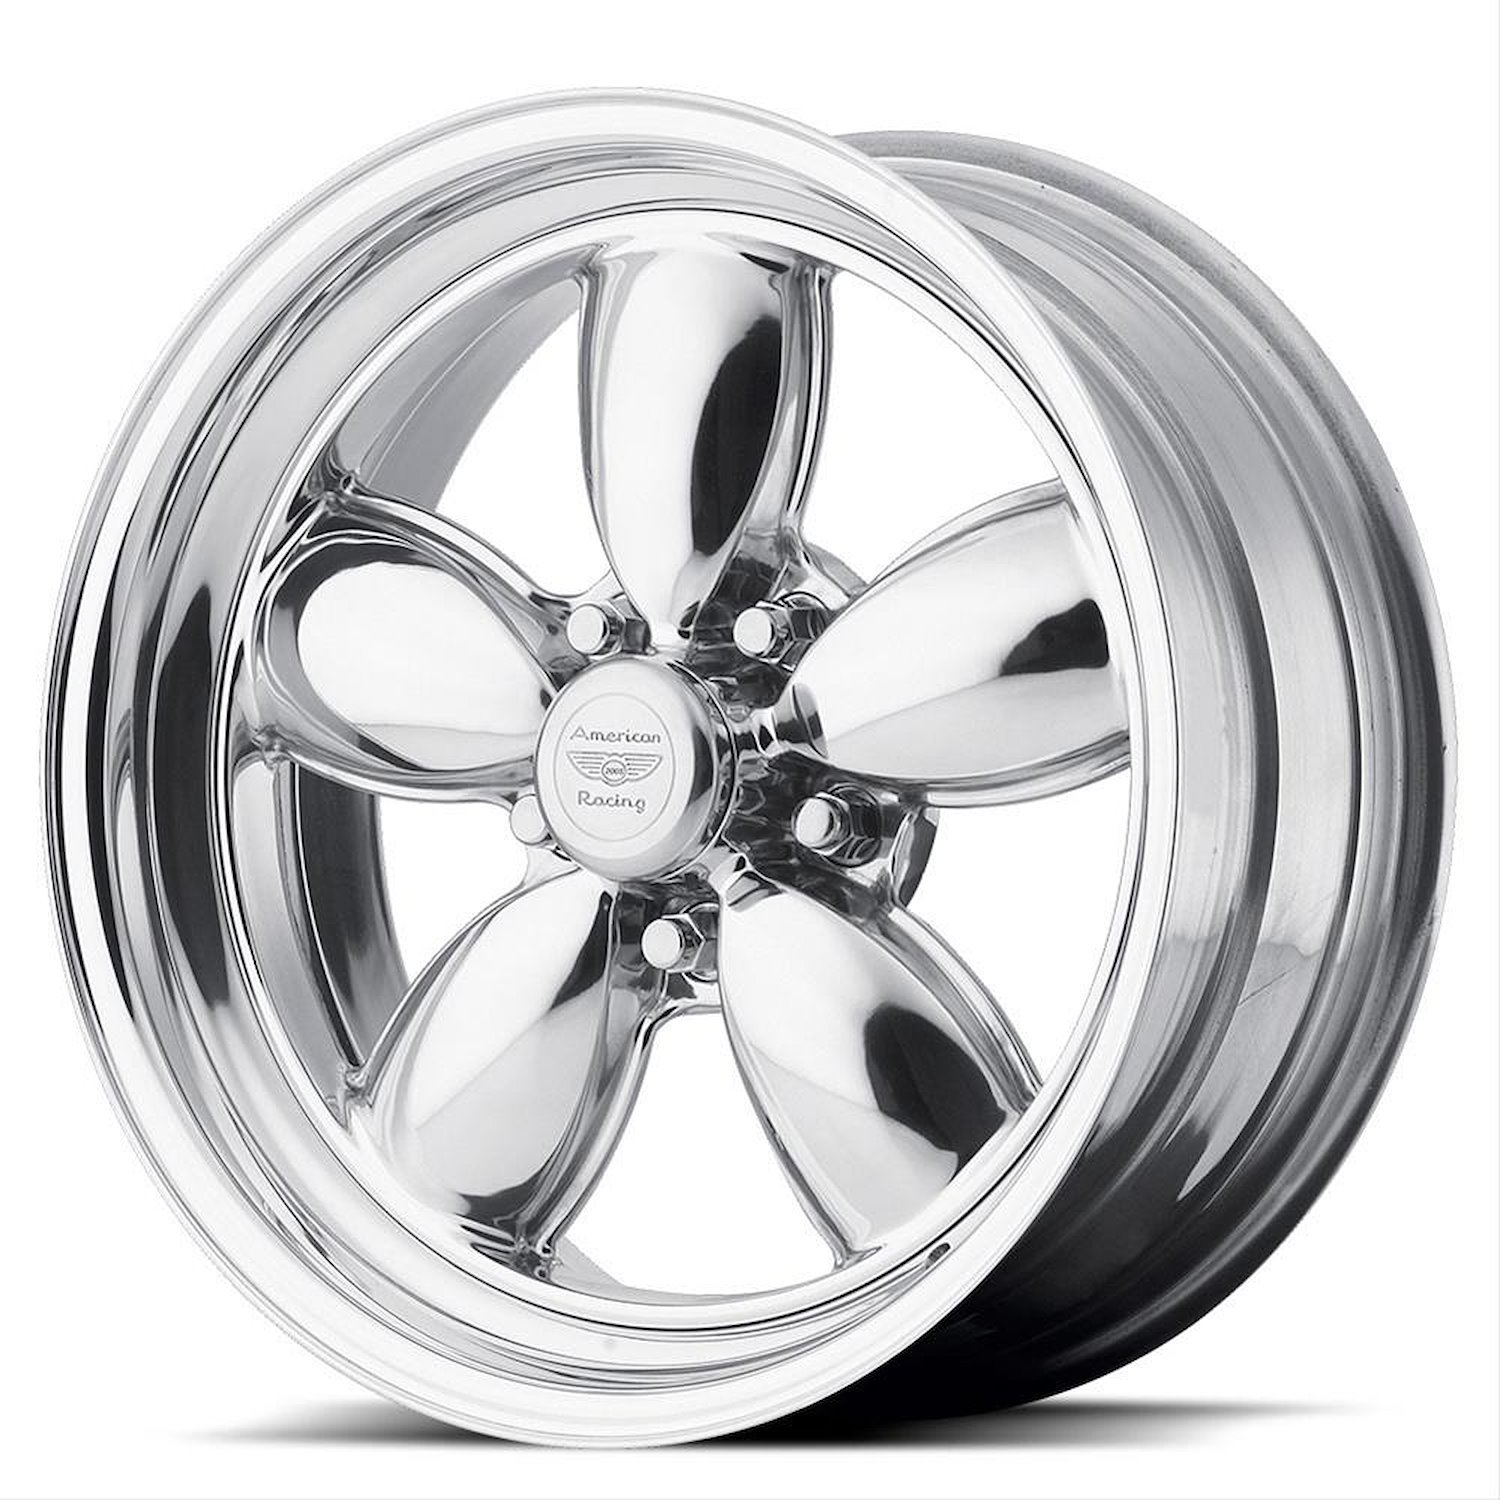 AMERICAN RACING CLASSIC 200S TWO-PIECE POLISHED 15 x 6 5X4.75 -6 3.26